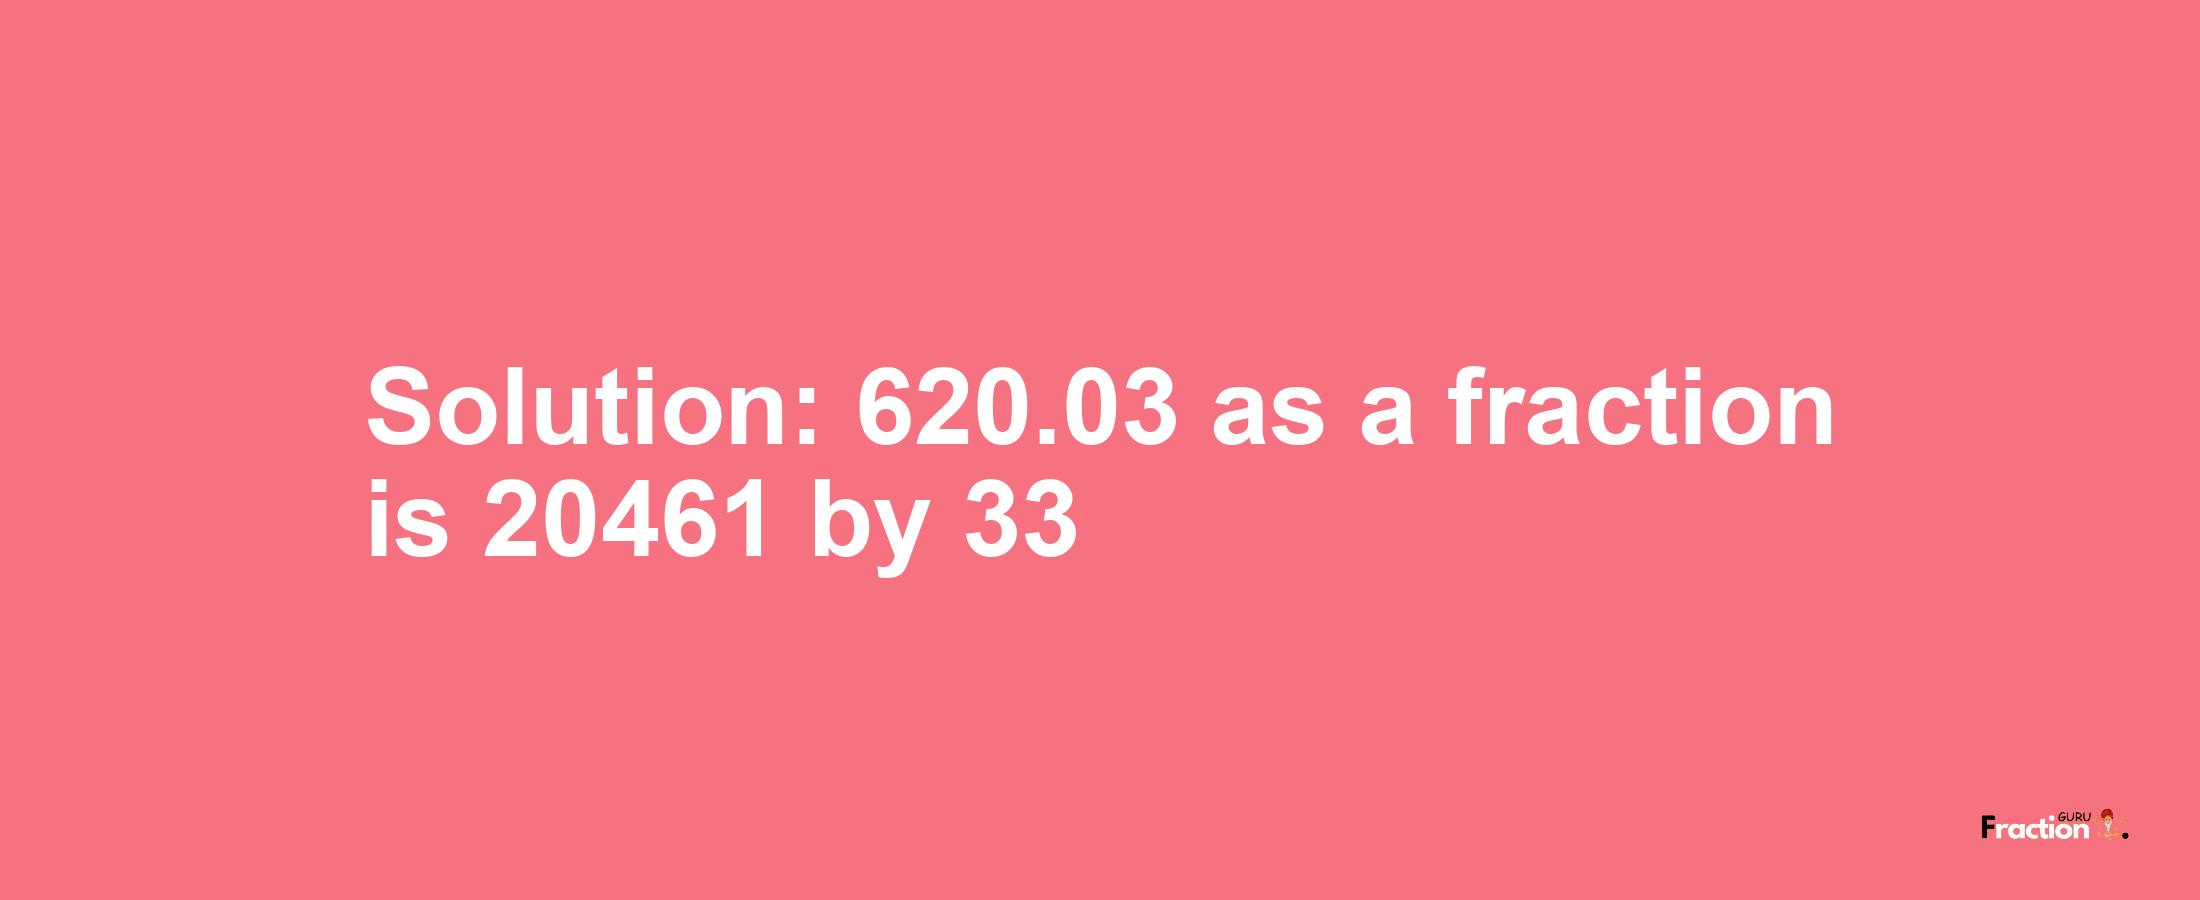 Solution:620.03 as a fraction is 20461/33